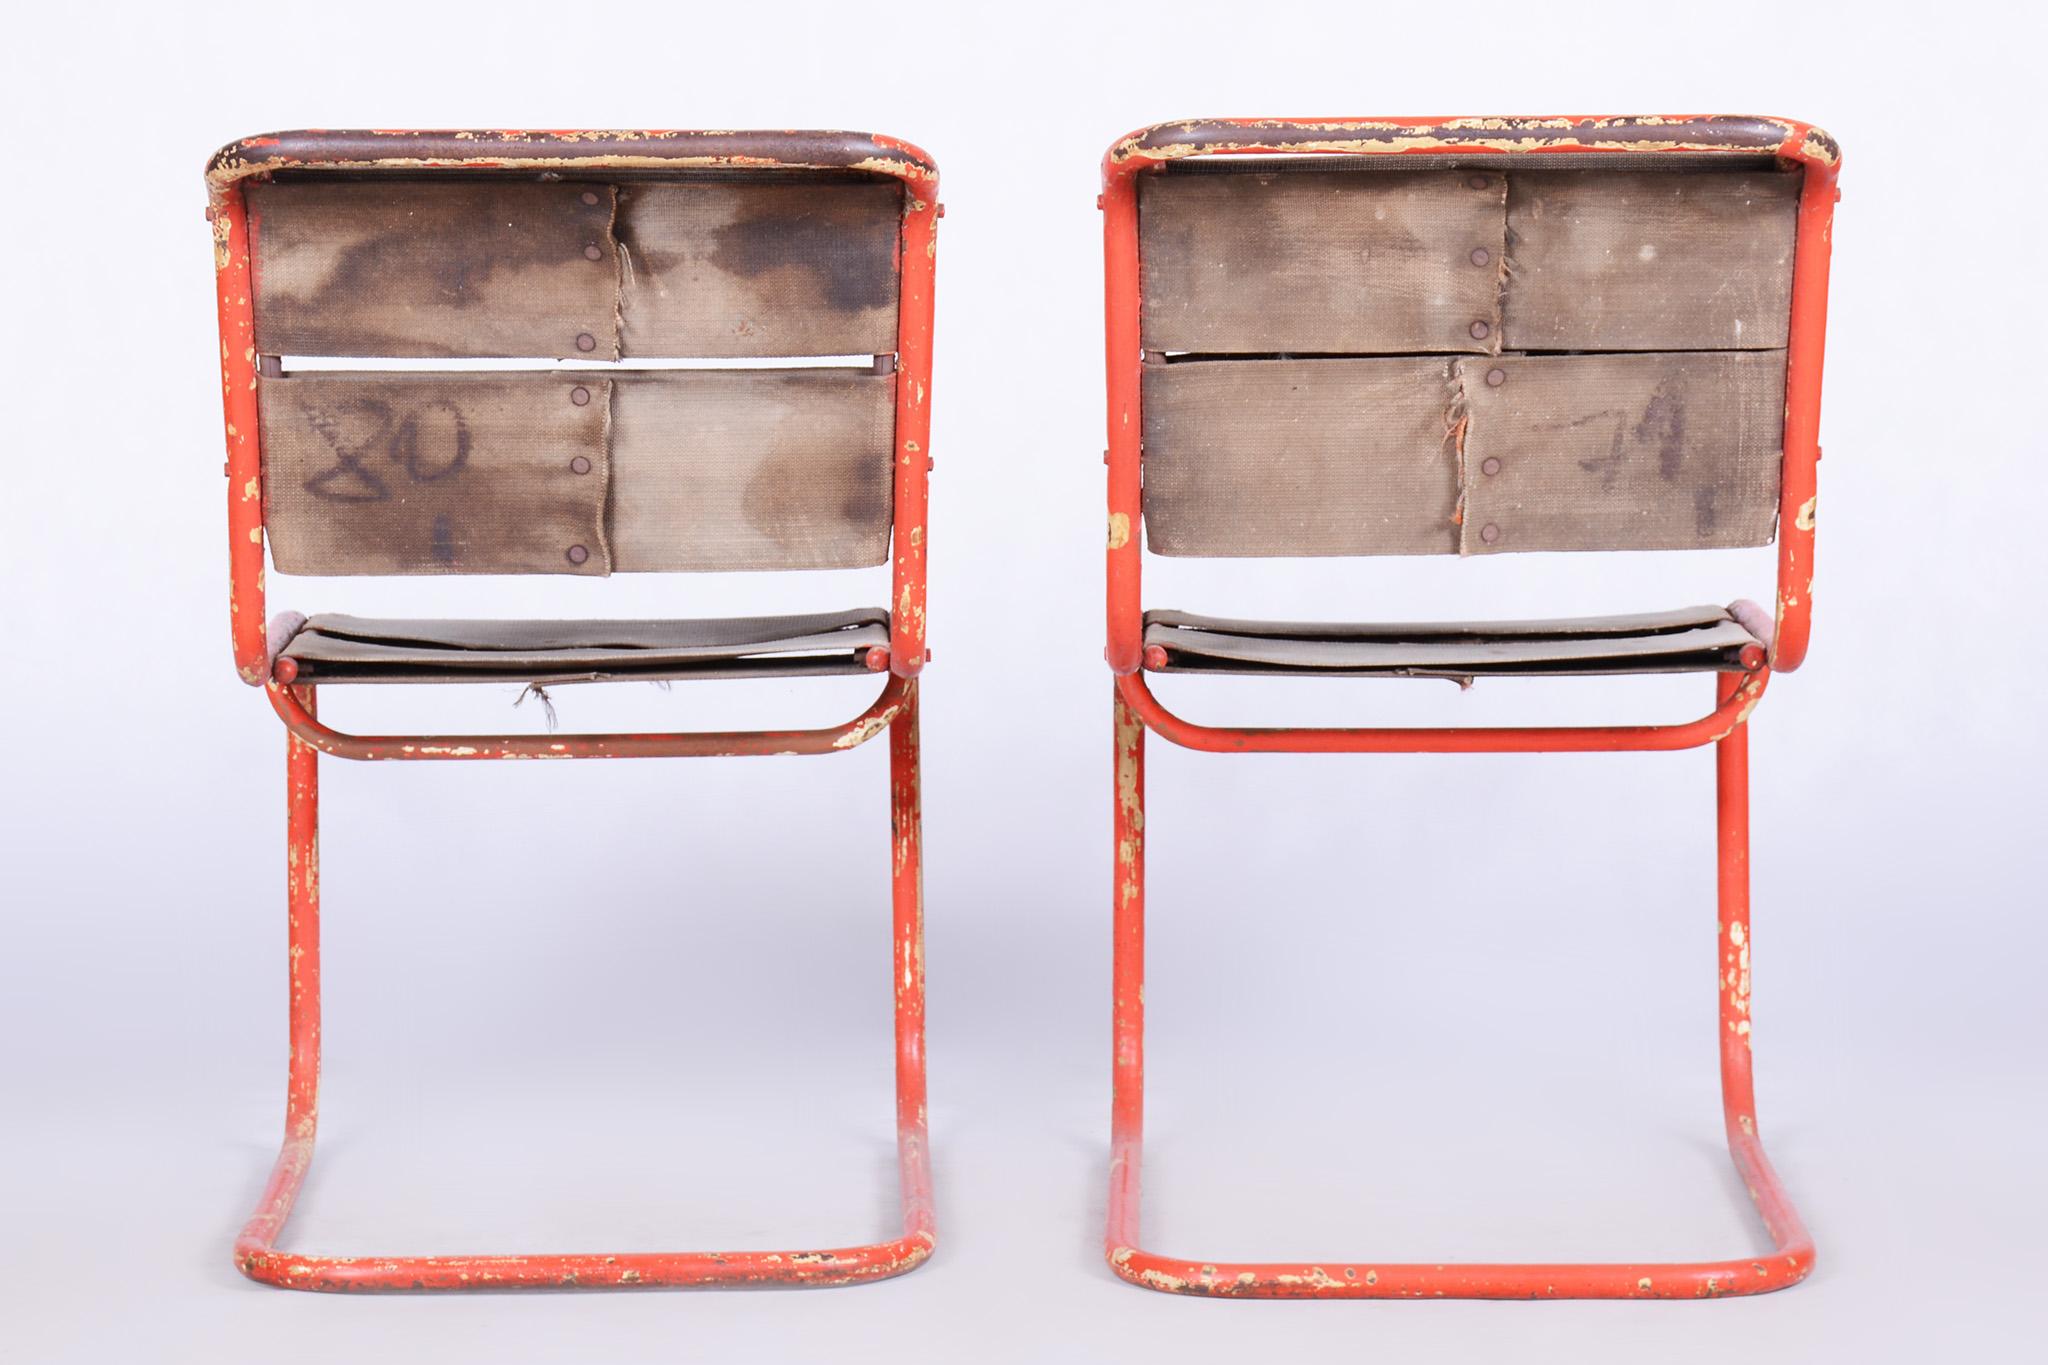 Original Pair of Chairs by Josef Gocar, Lacquered Steel, Czechia, 1930s In Good Condition For Sale In Horomerice, CZ